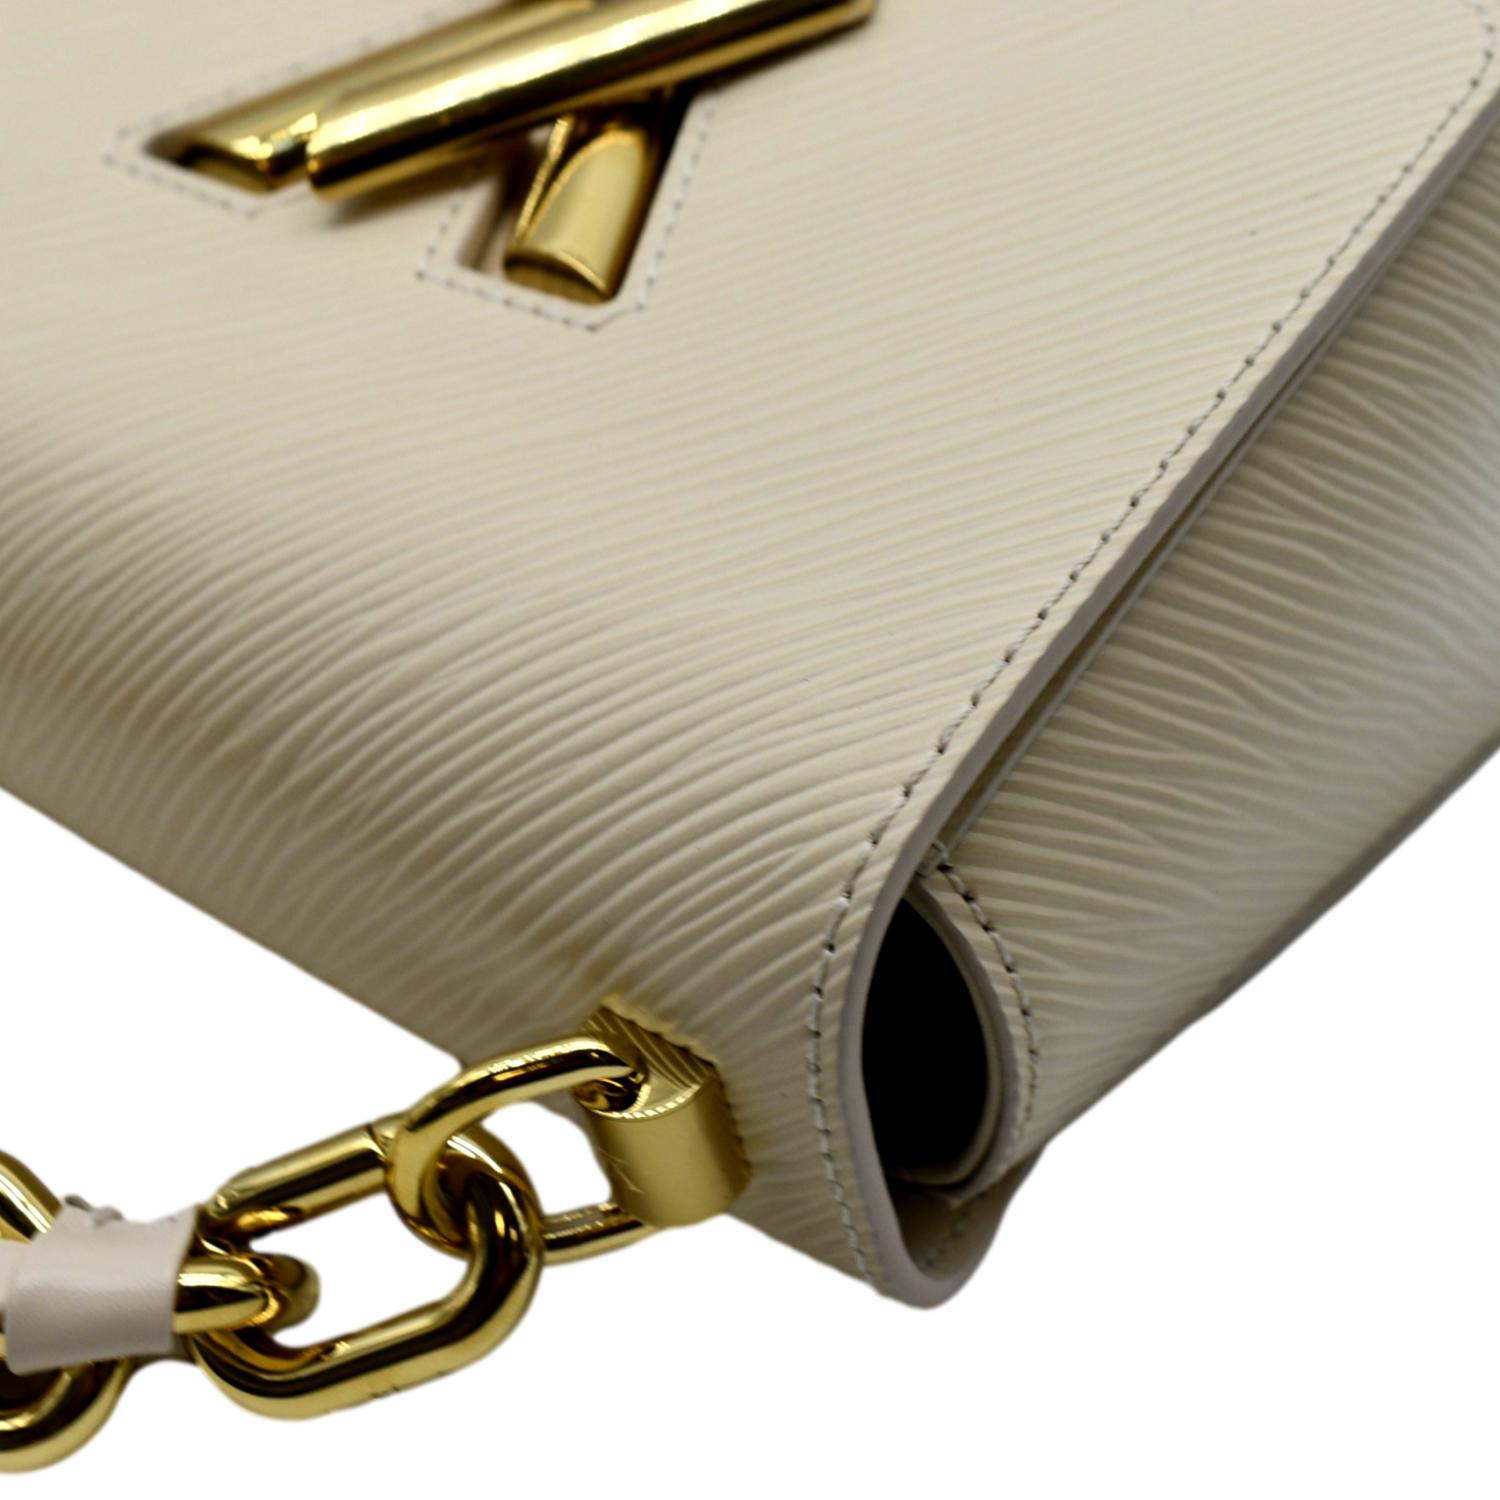 Félicie leather crossbody bag Louis Vuitton Beige in Leather